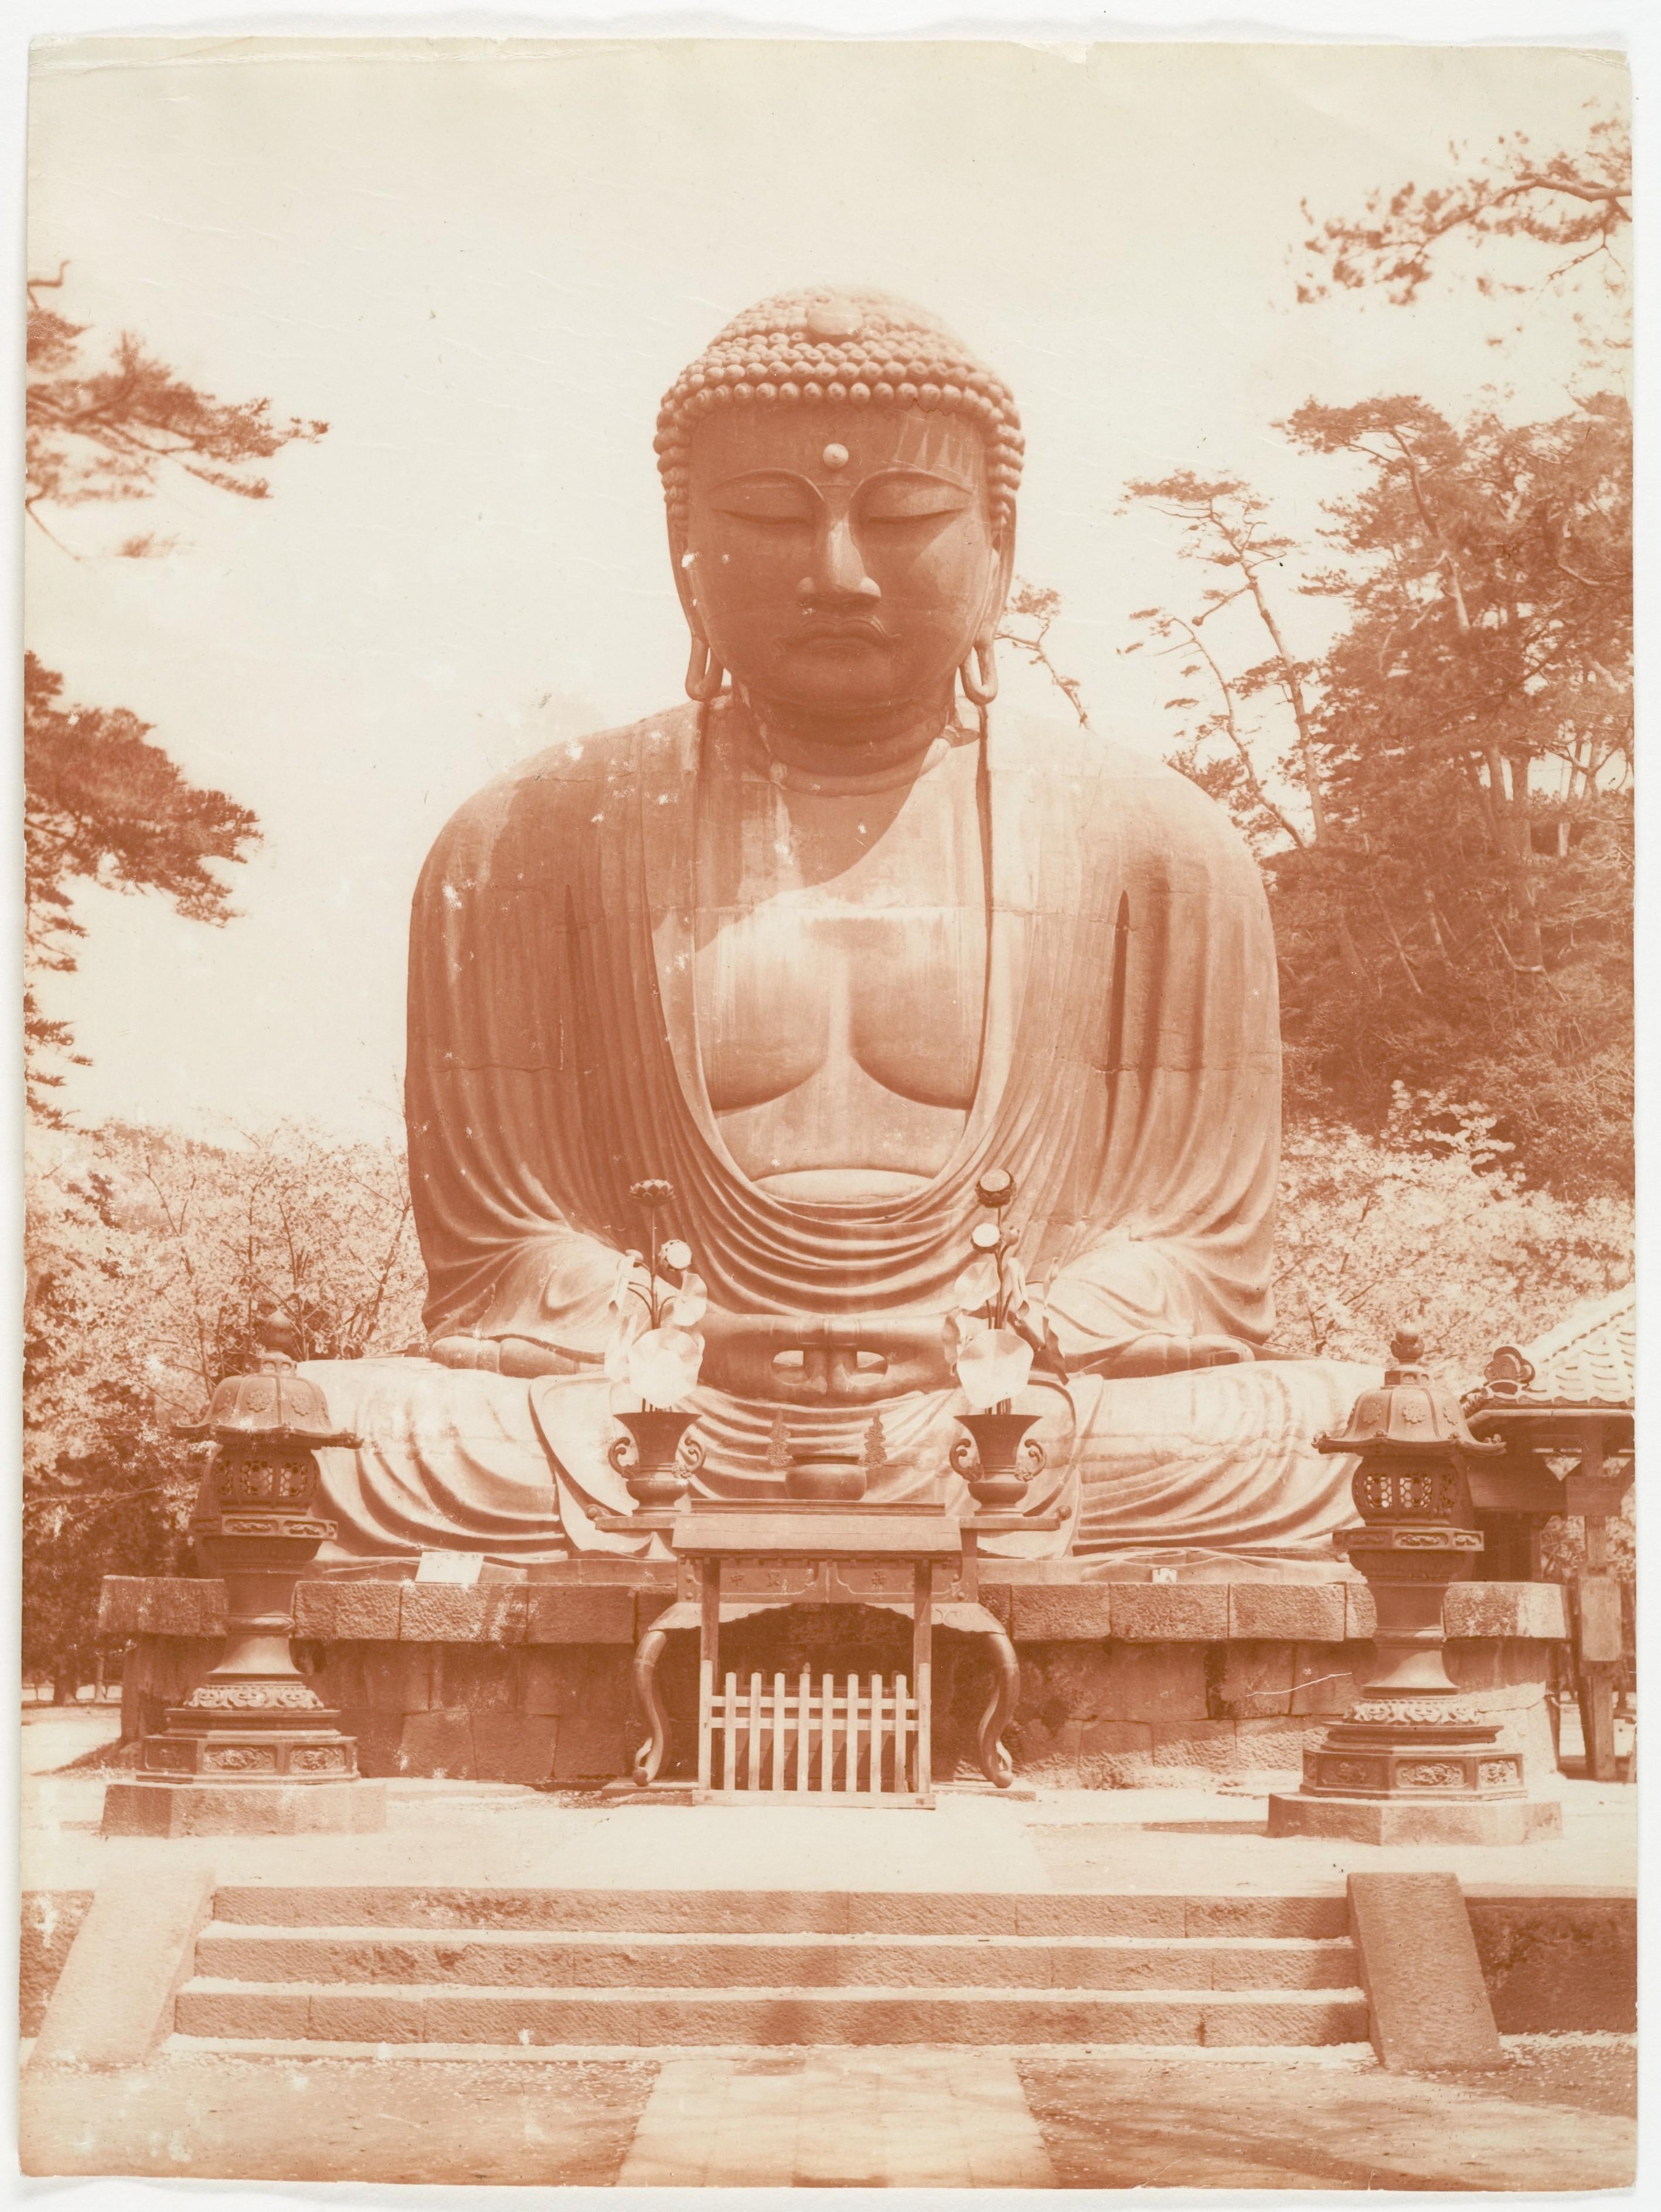 http://upload.wikimedia.org/wikipedia/commons/a/a5/Shrine_with_Monumental_Statue_of_Buddah_by_Adolf_de_Meyer_1890%27s.jpg